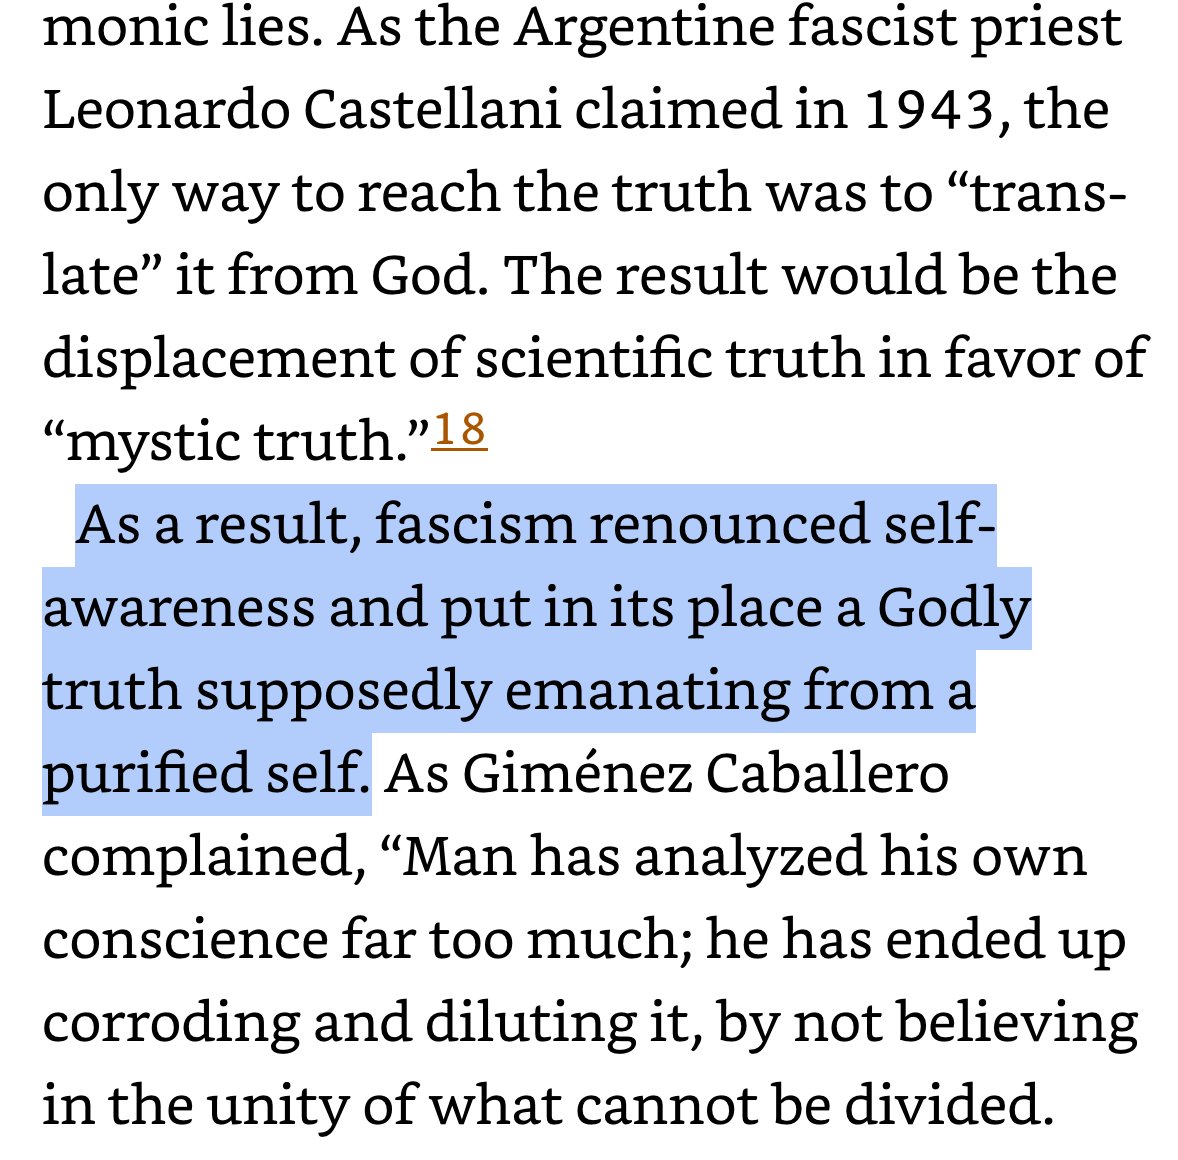 12/ There are religious overtones to fascist lies — they come close to worshipping the leader who articulates what they feel to be a transcendent truth (Clip #1)Finchelstein also touches on how fascists equate truth with power. (Clip #2)